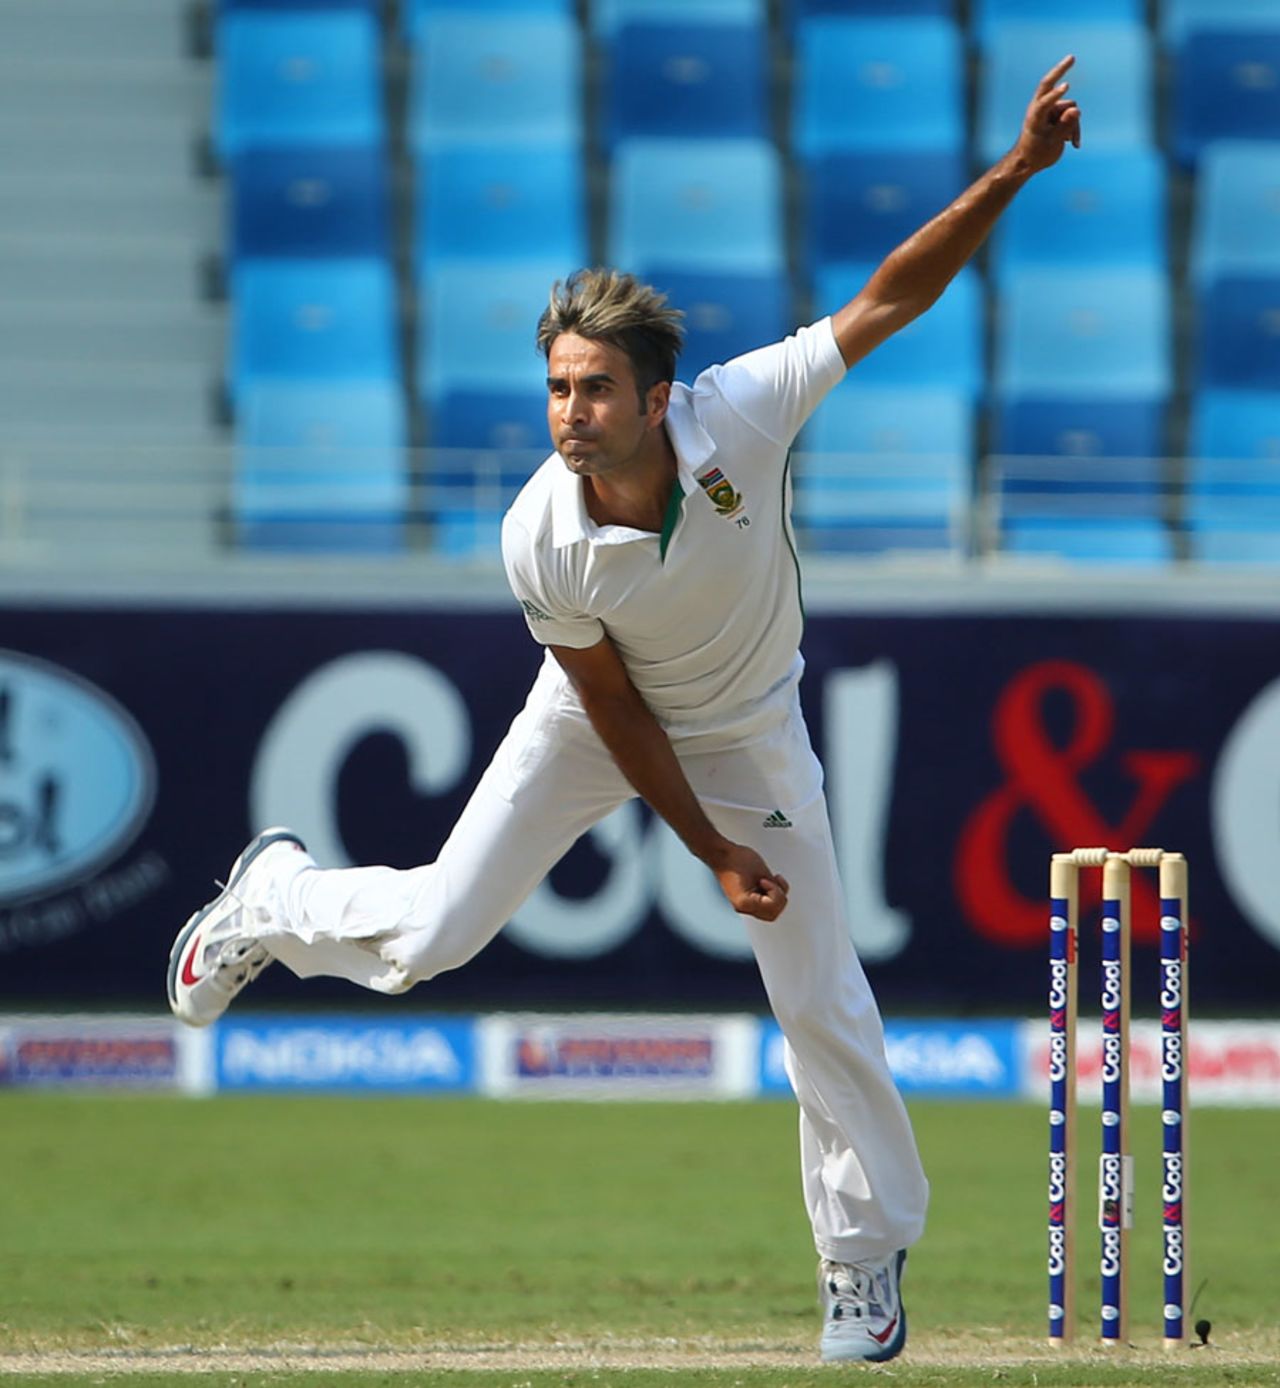 Imran Tahir bowled Younis Khan out for 36, Pakistan v South Africa, 2nd Test, Dubai, 3rd day, October 25, 2013